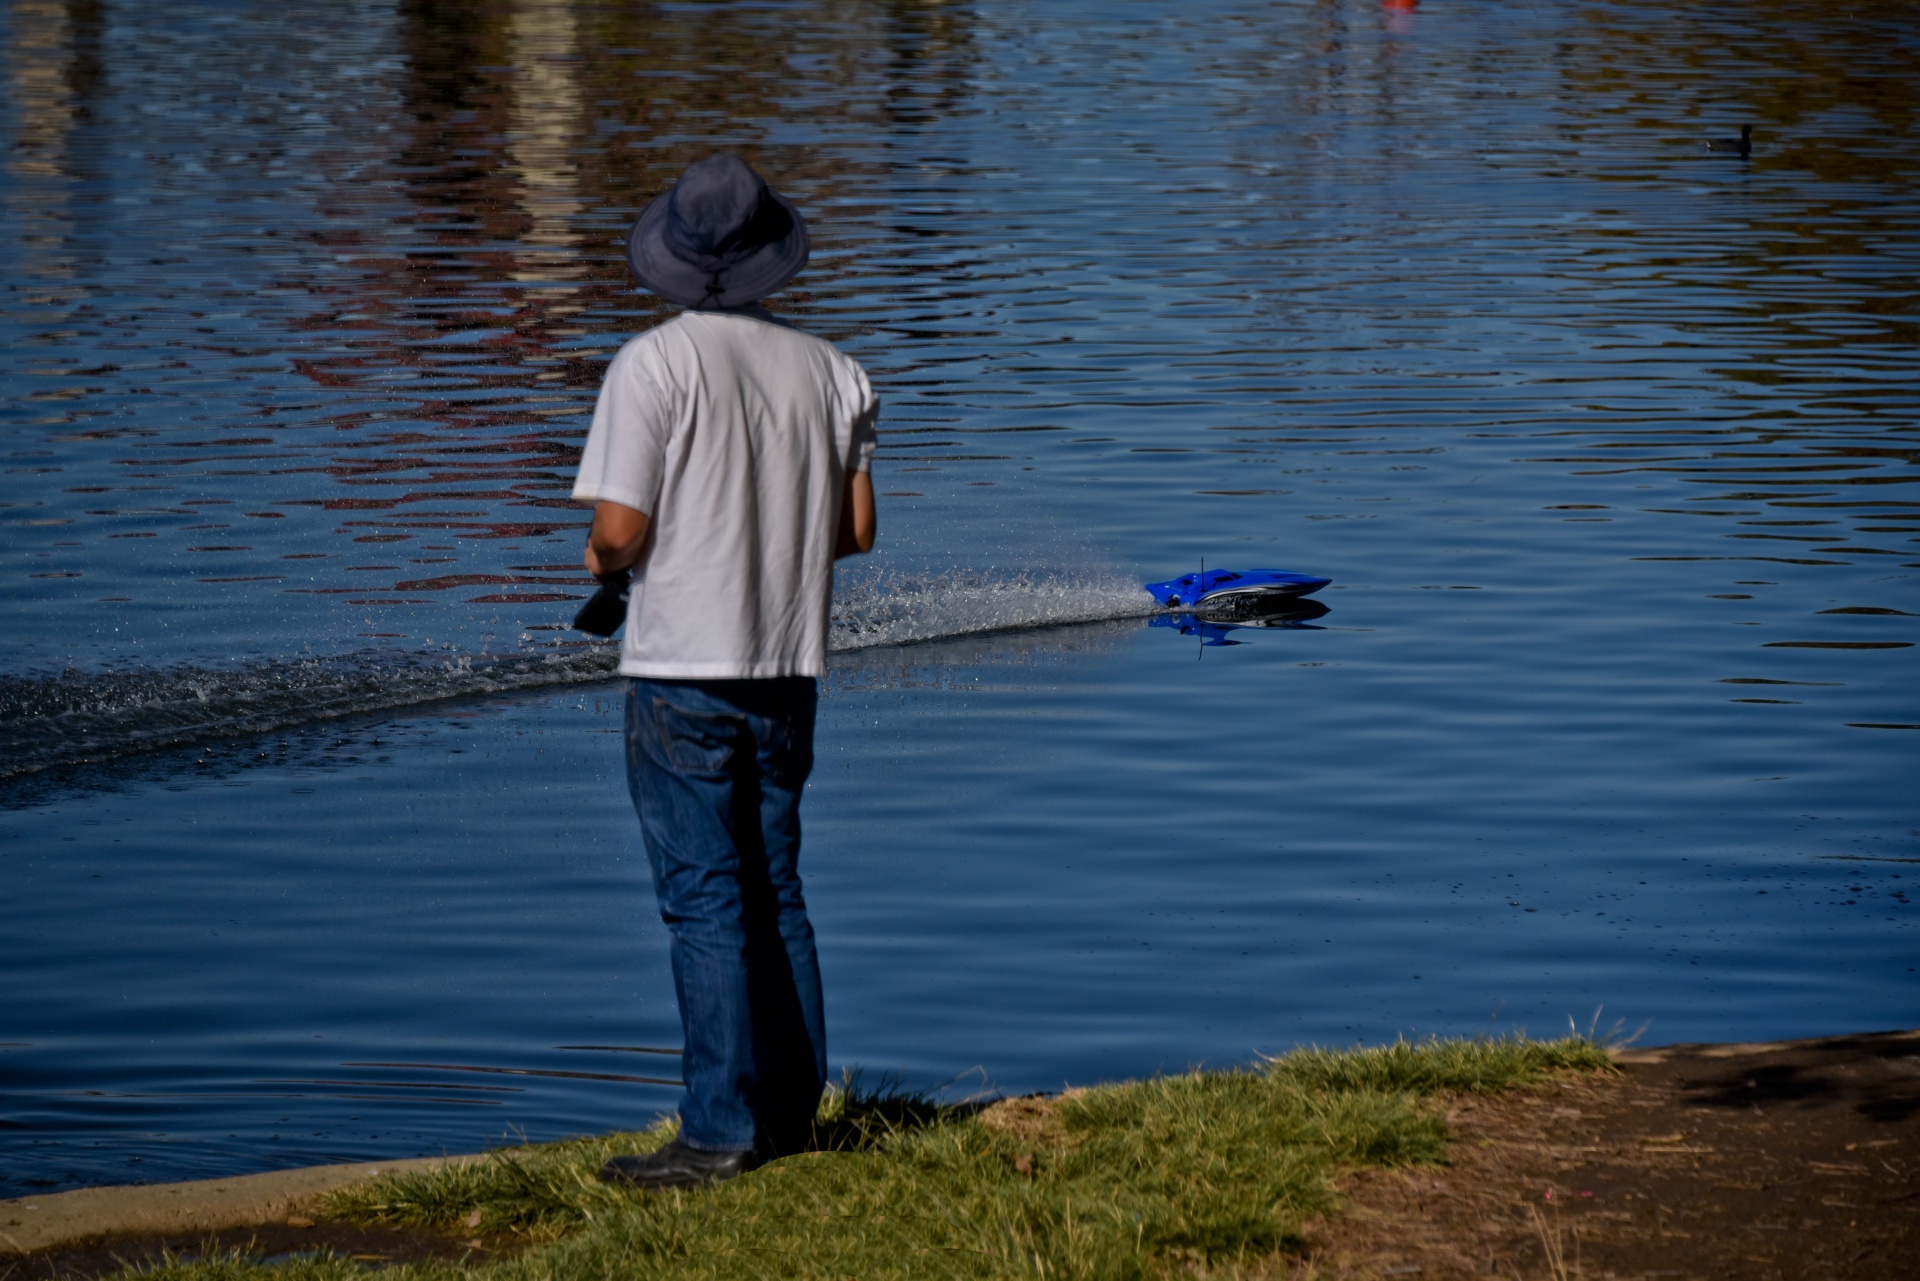 Man wearing a hat controlling a radio controlled boat on the water of a lake